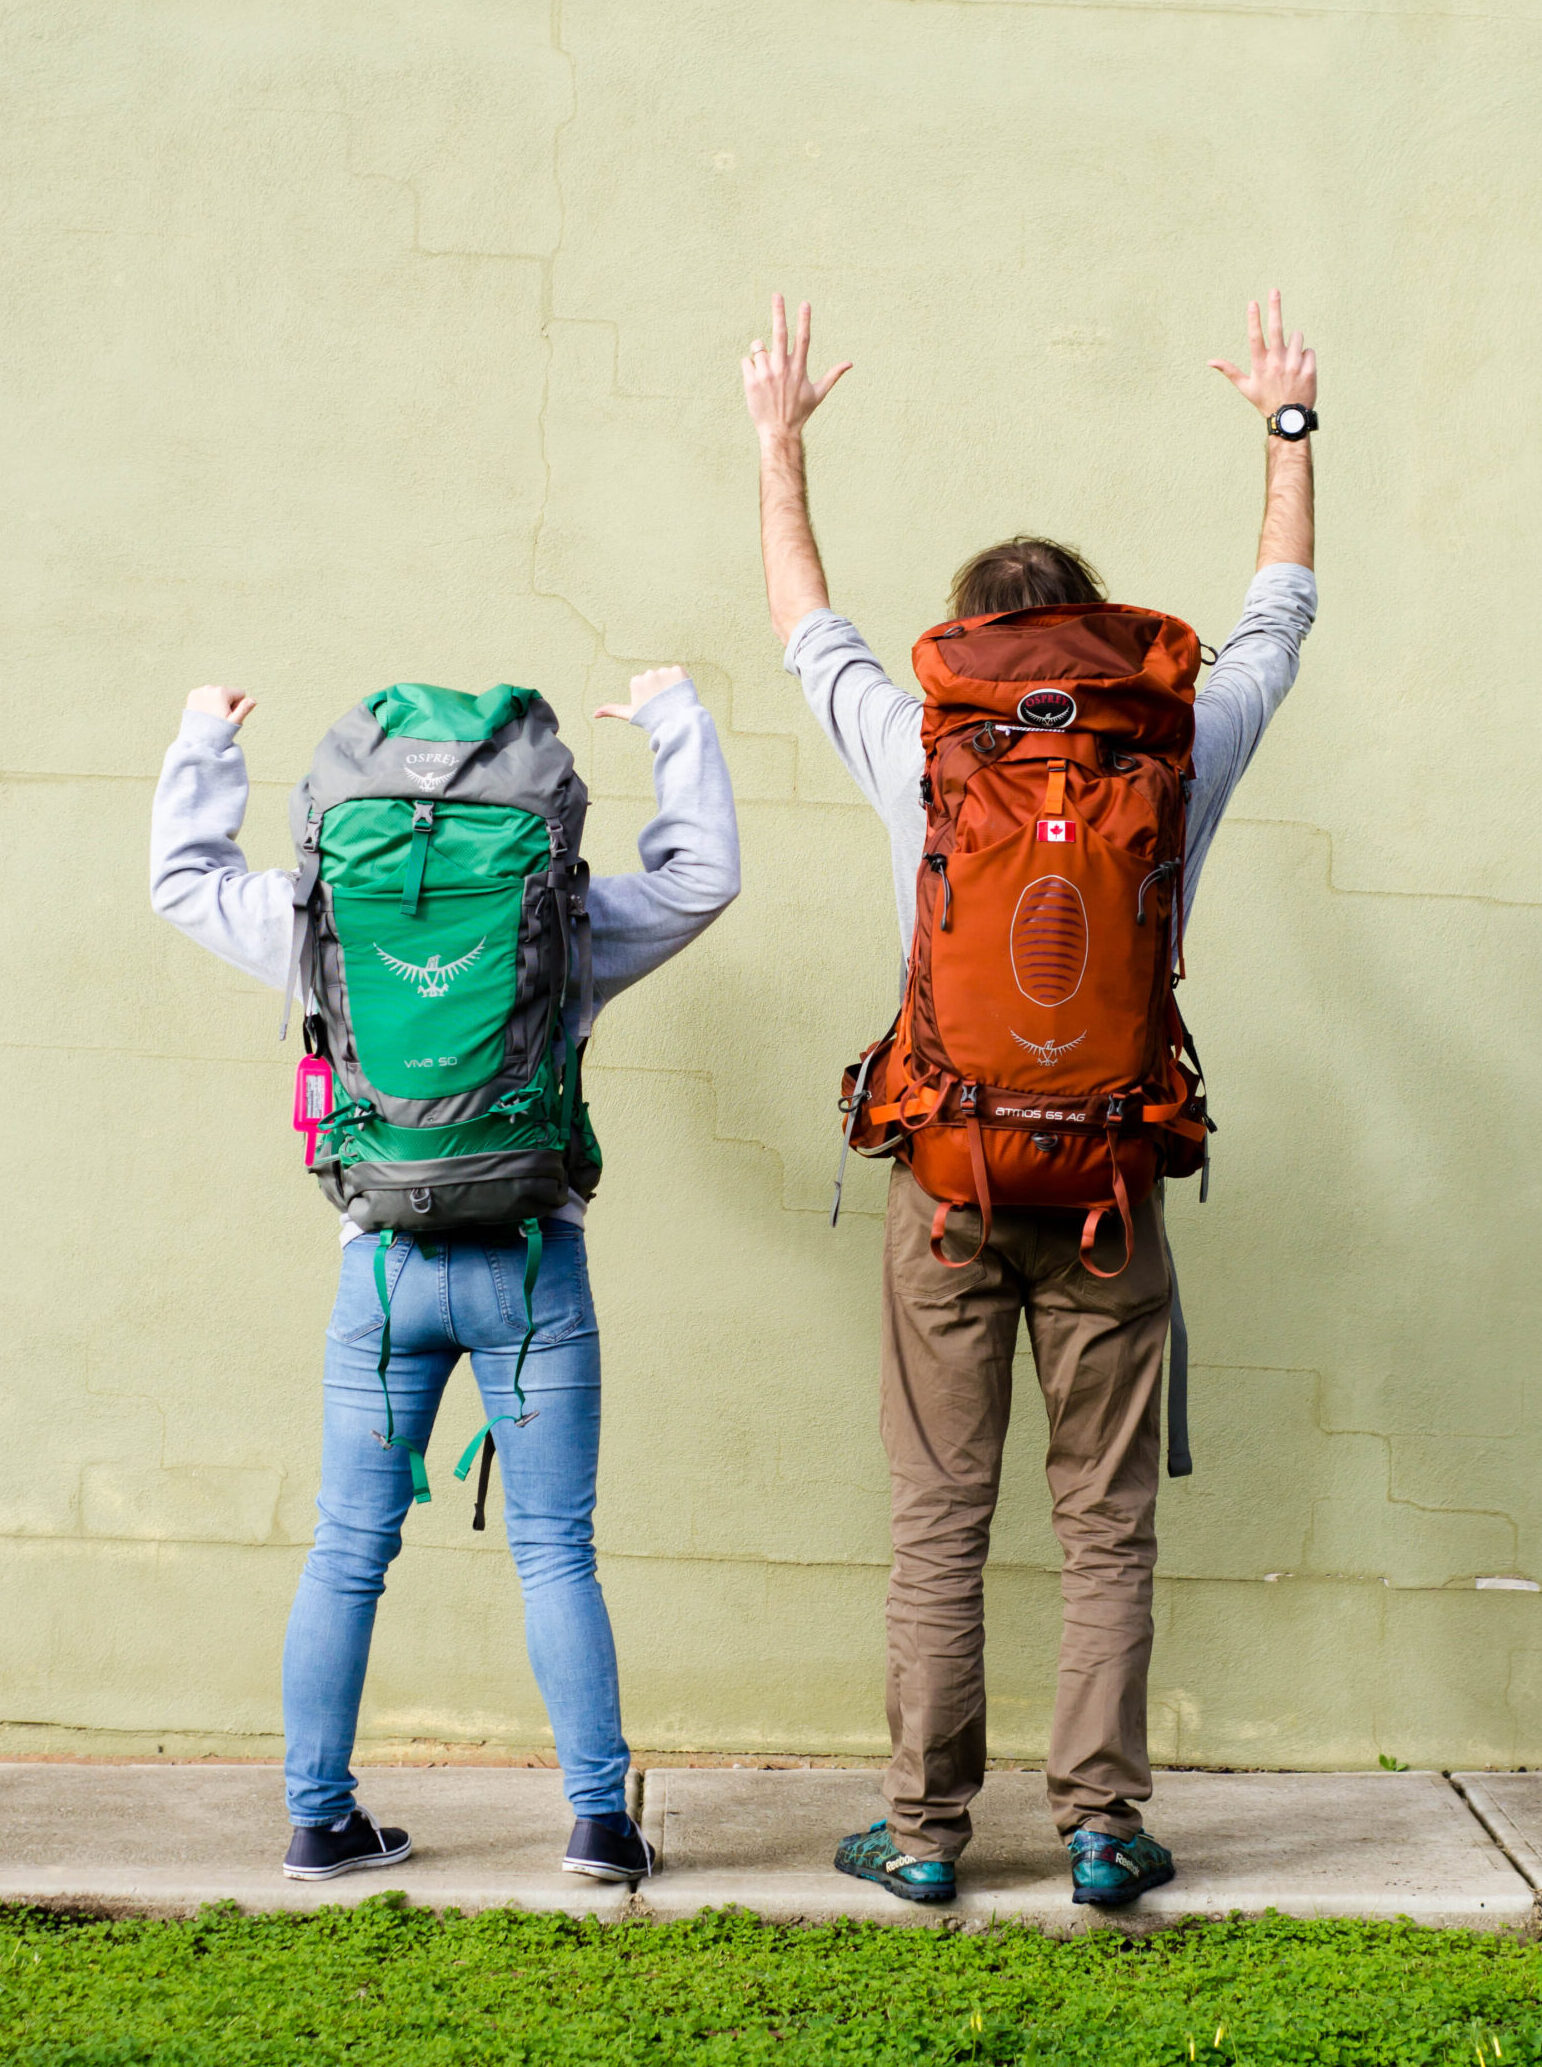 About YWAM, SEND, YWAM Evangelism. Youth with backpacks